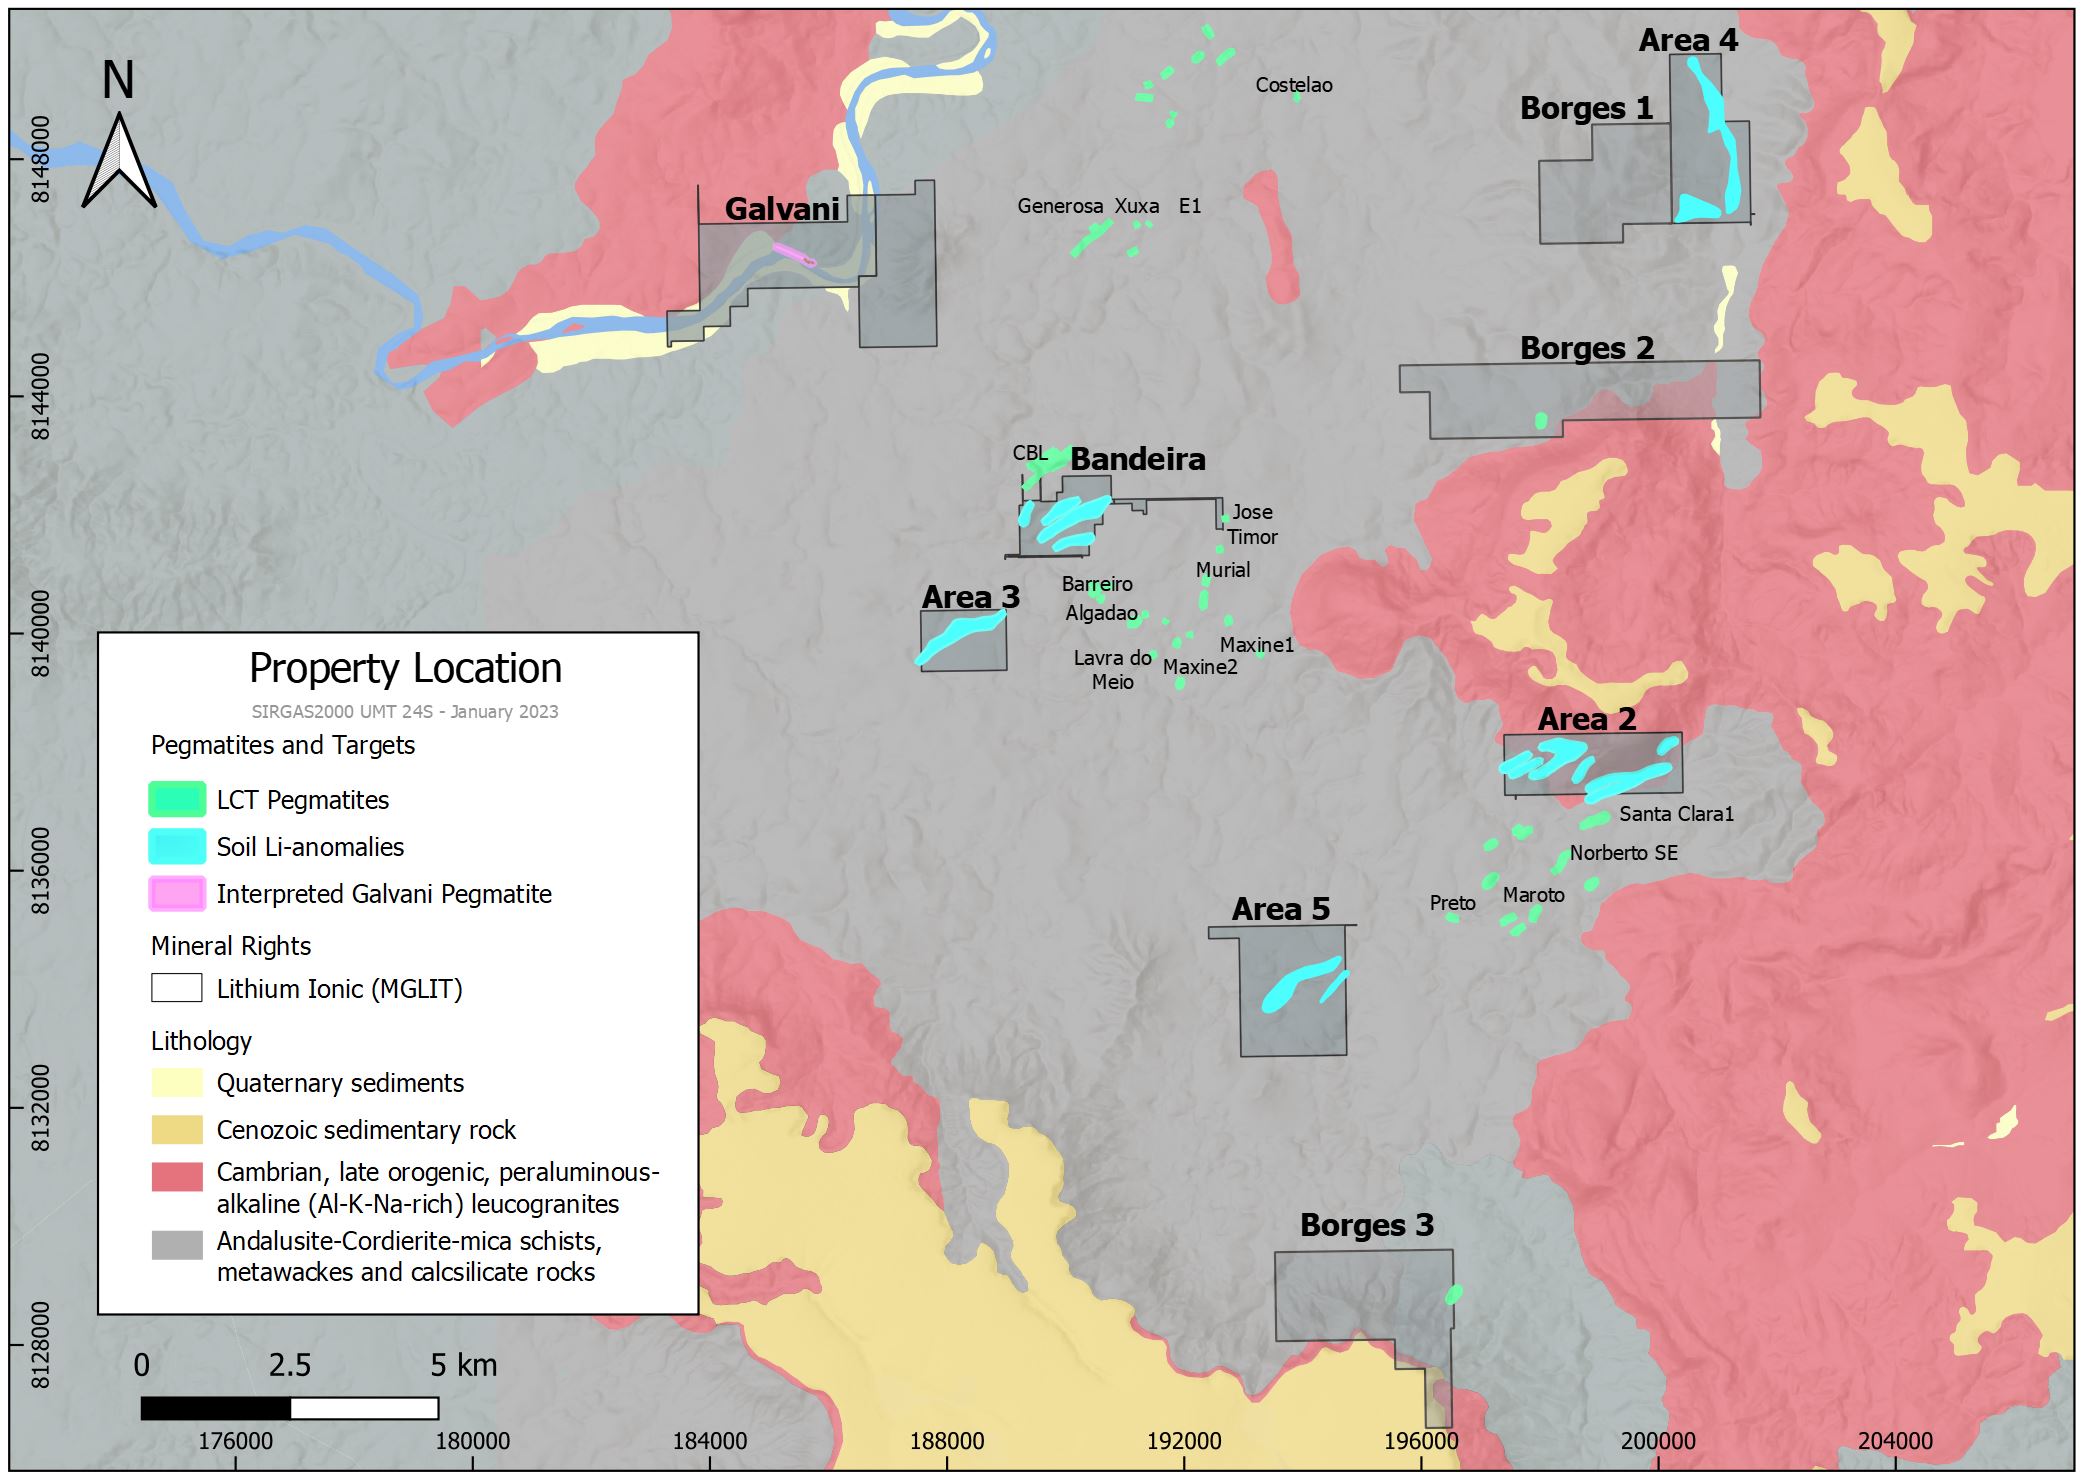 Lithium Ionic Claims Totalling ~3,600 ha Overlaid on Geology Map